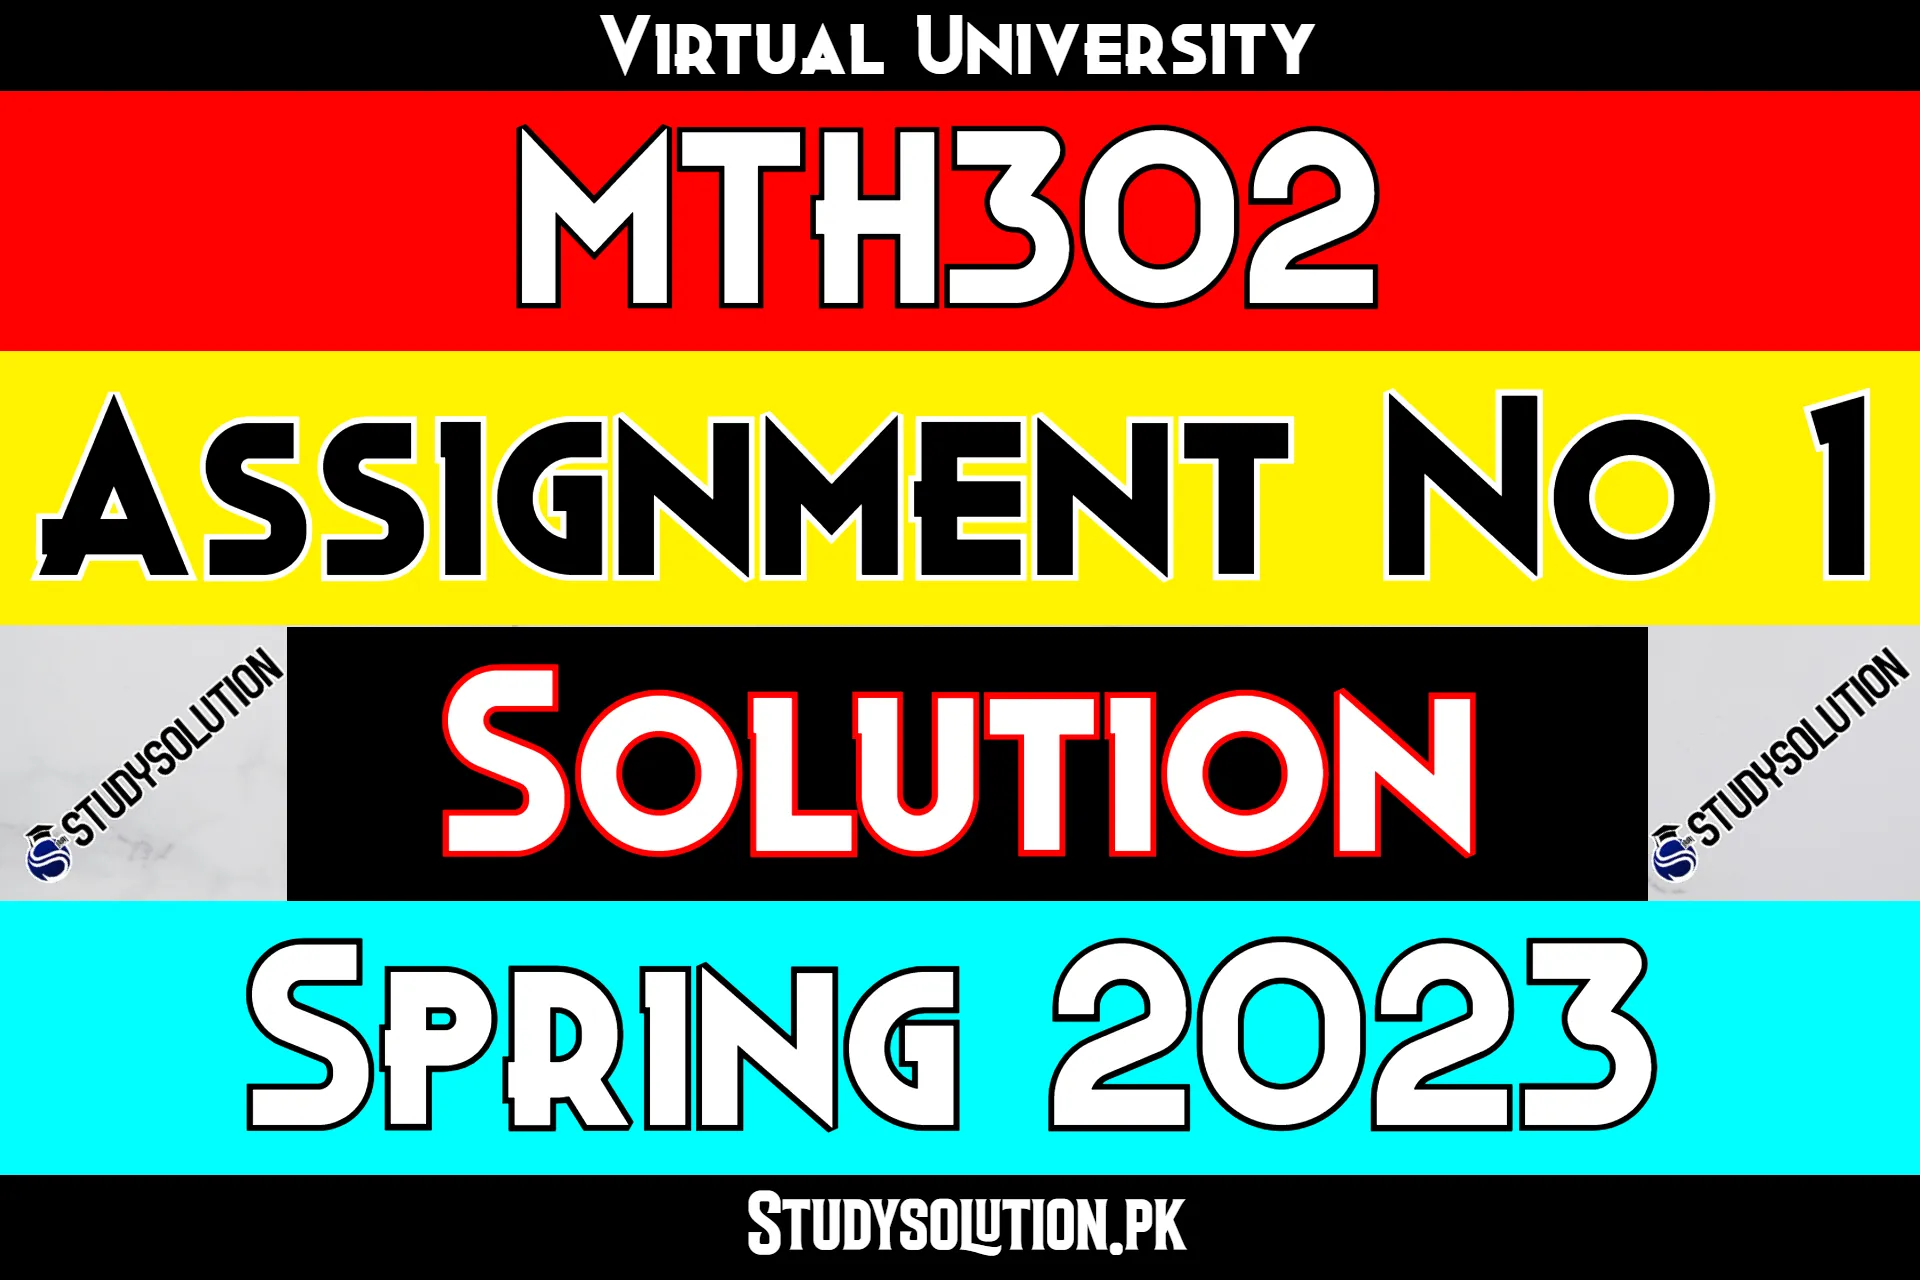 MTH302 Assignment No 1 Solution Spring 2023